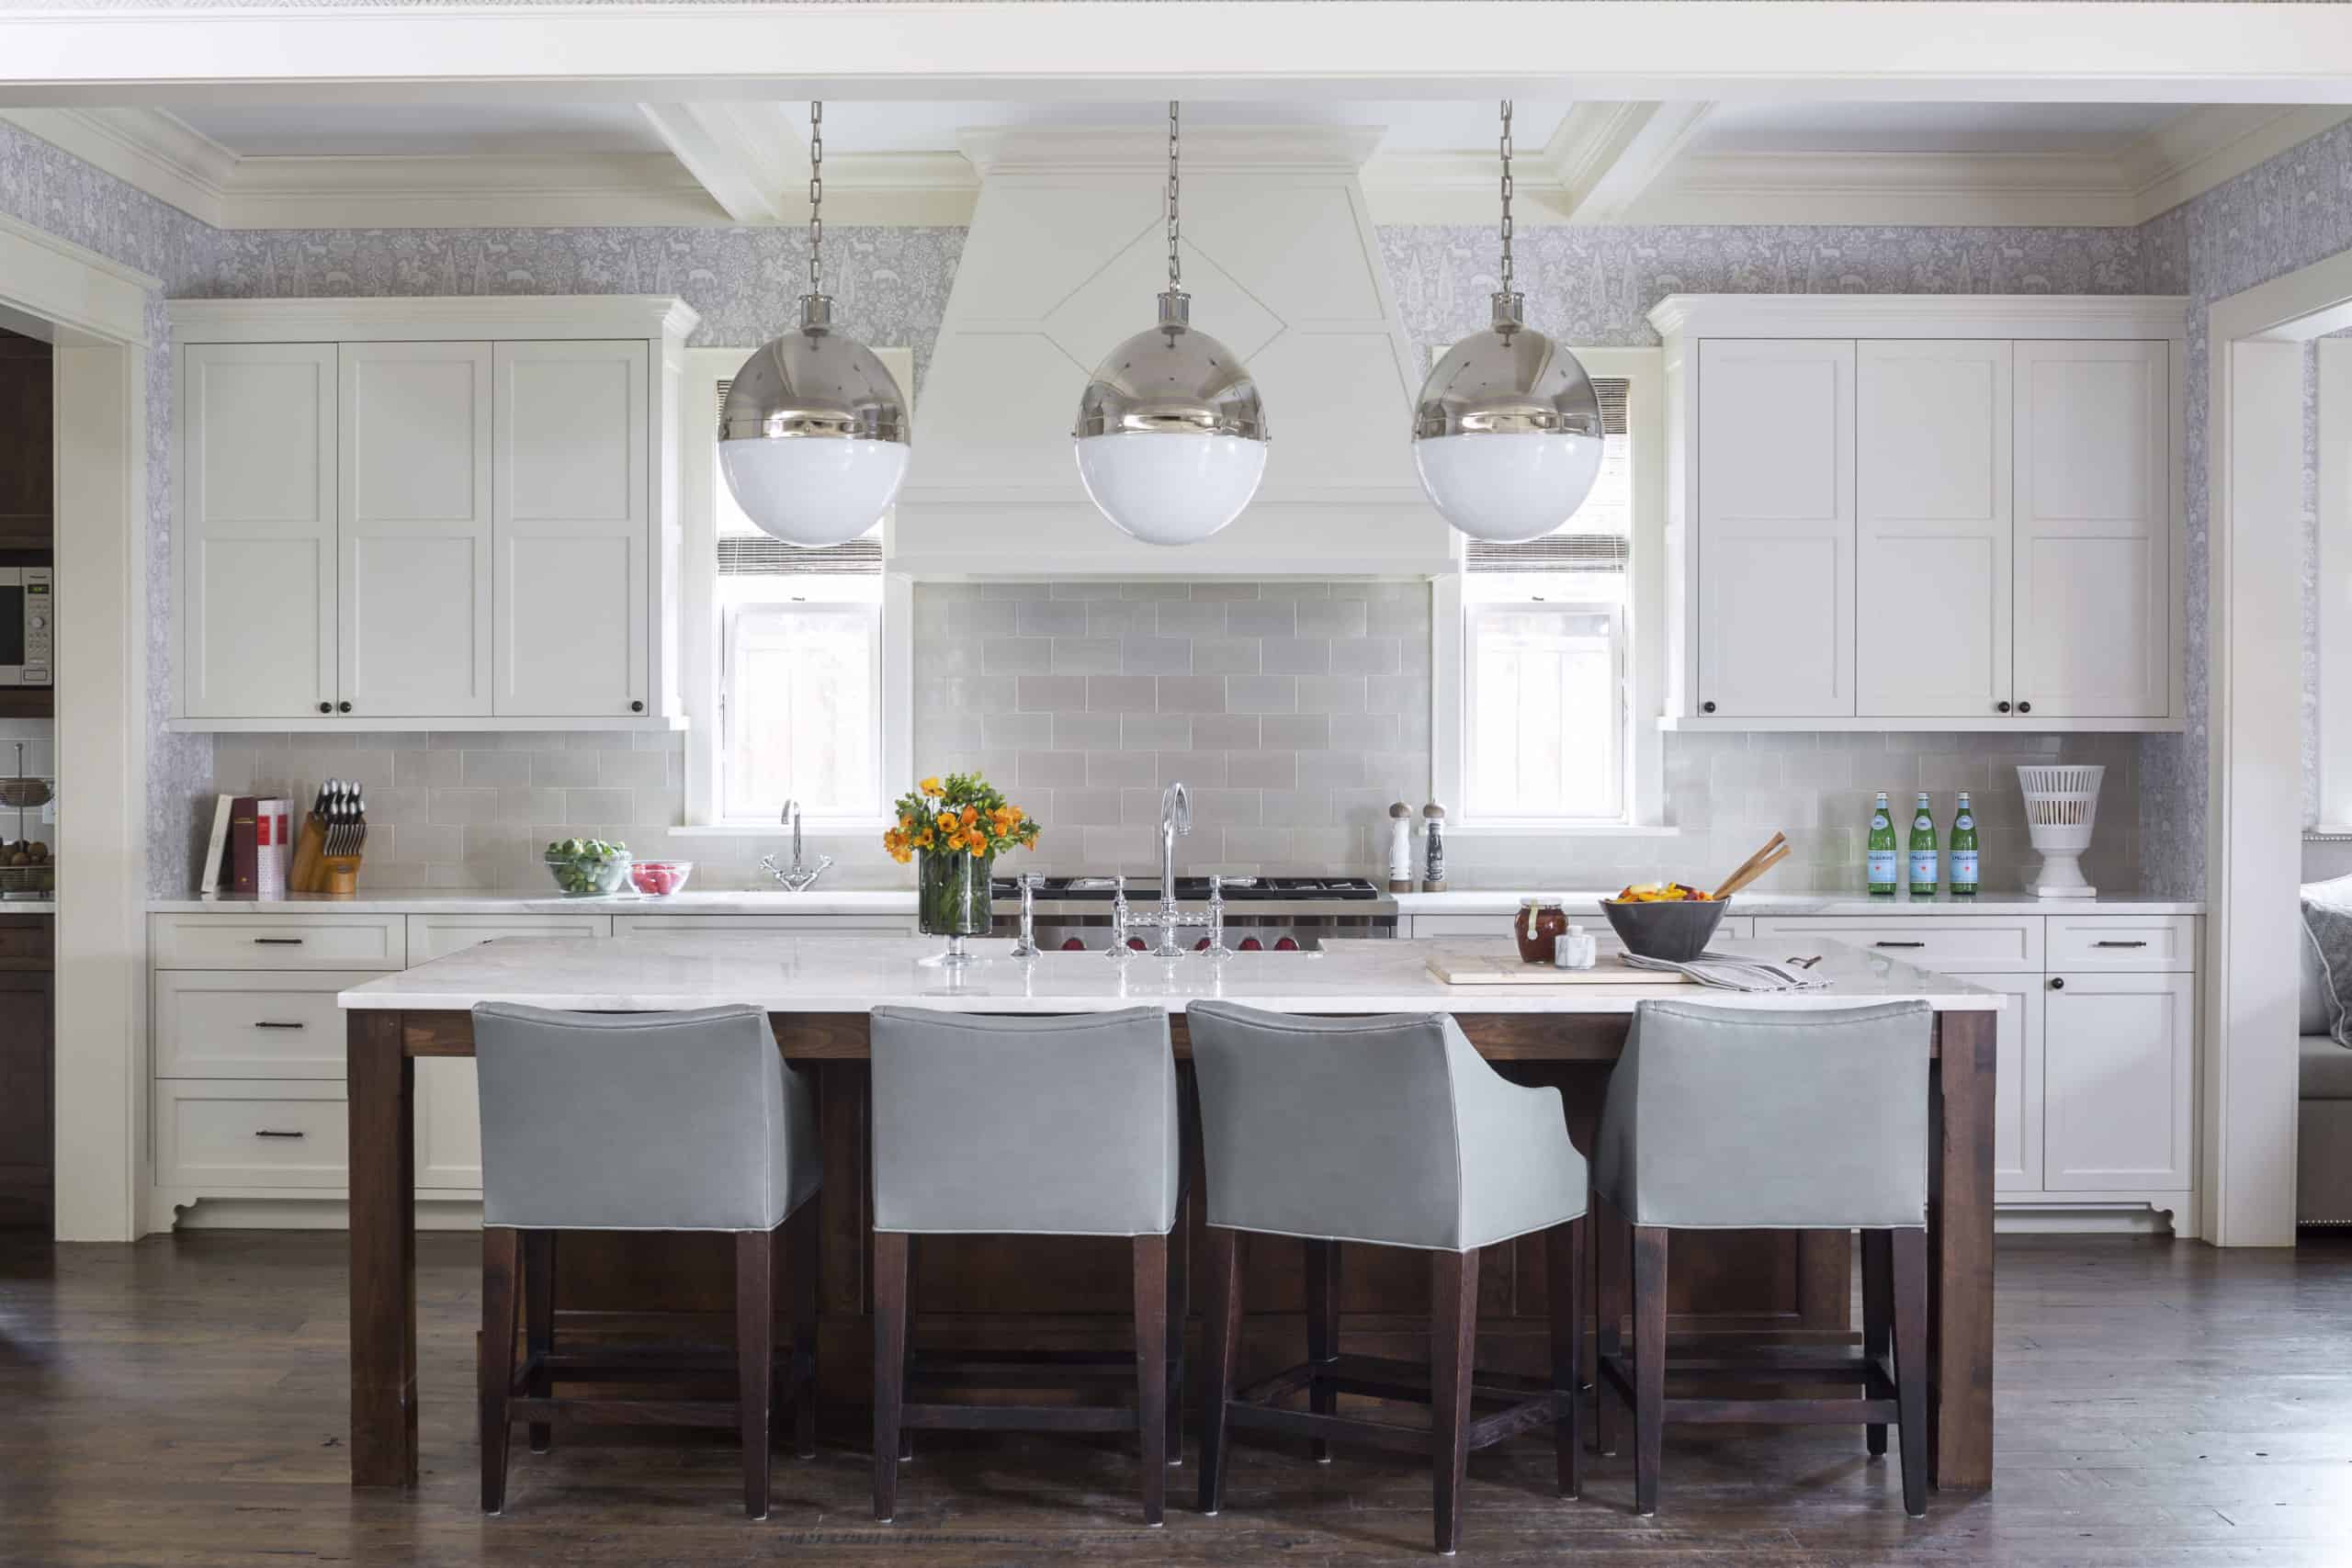 Remodeled Colorado kitchen with large island pendants by Andrea Schumacher Interiors